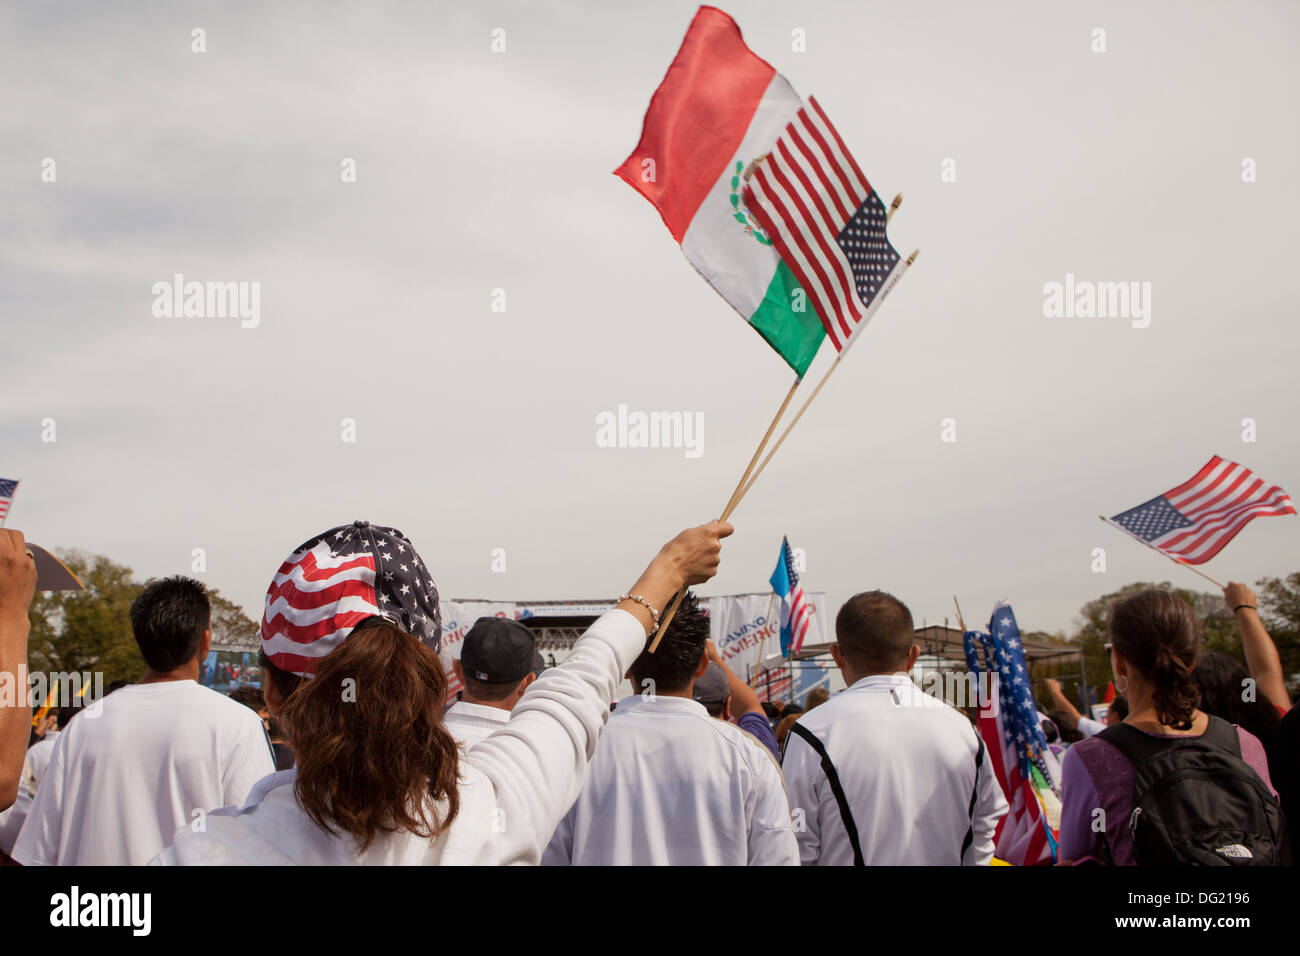 Woman waving American and Mexican flags at Immigration Reform rally - Washington, DC USA Stock Photo